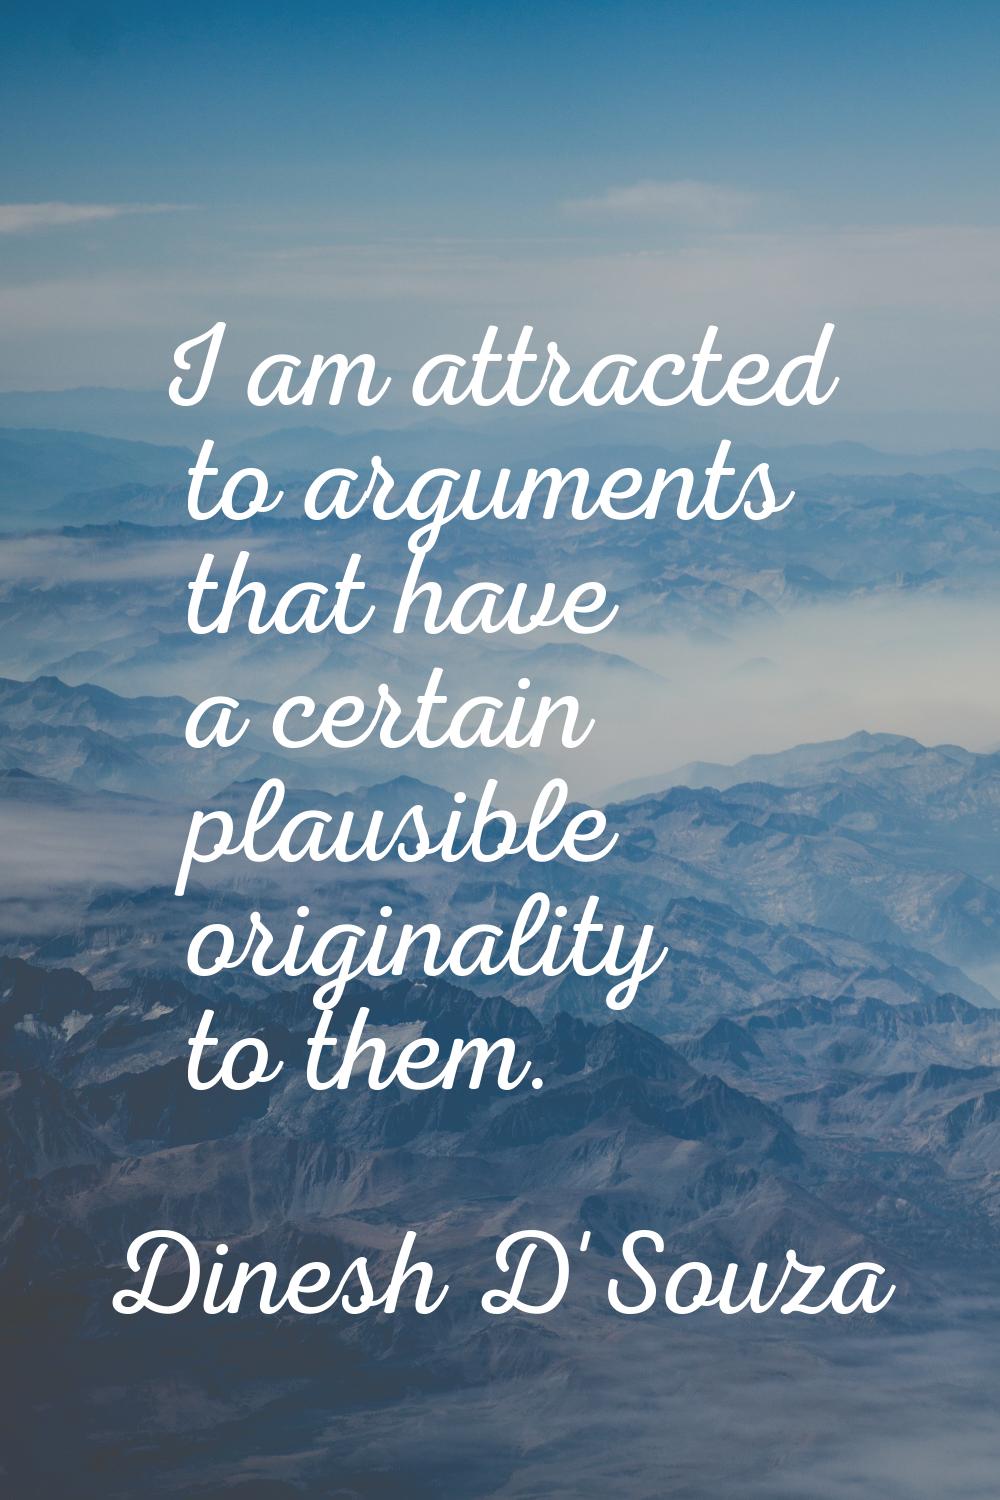 I am attracted to arguments that have a certain plausible originality to them.